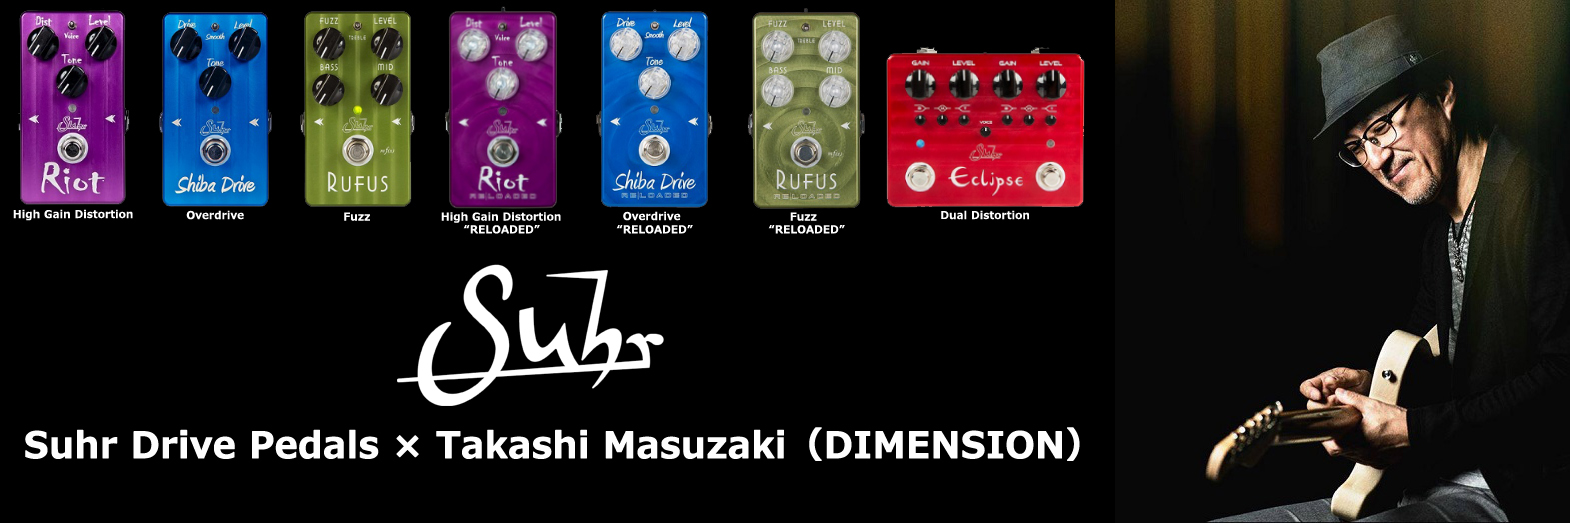 Suhr Effector – Drive Pedals